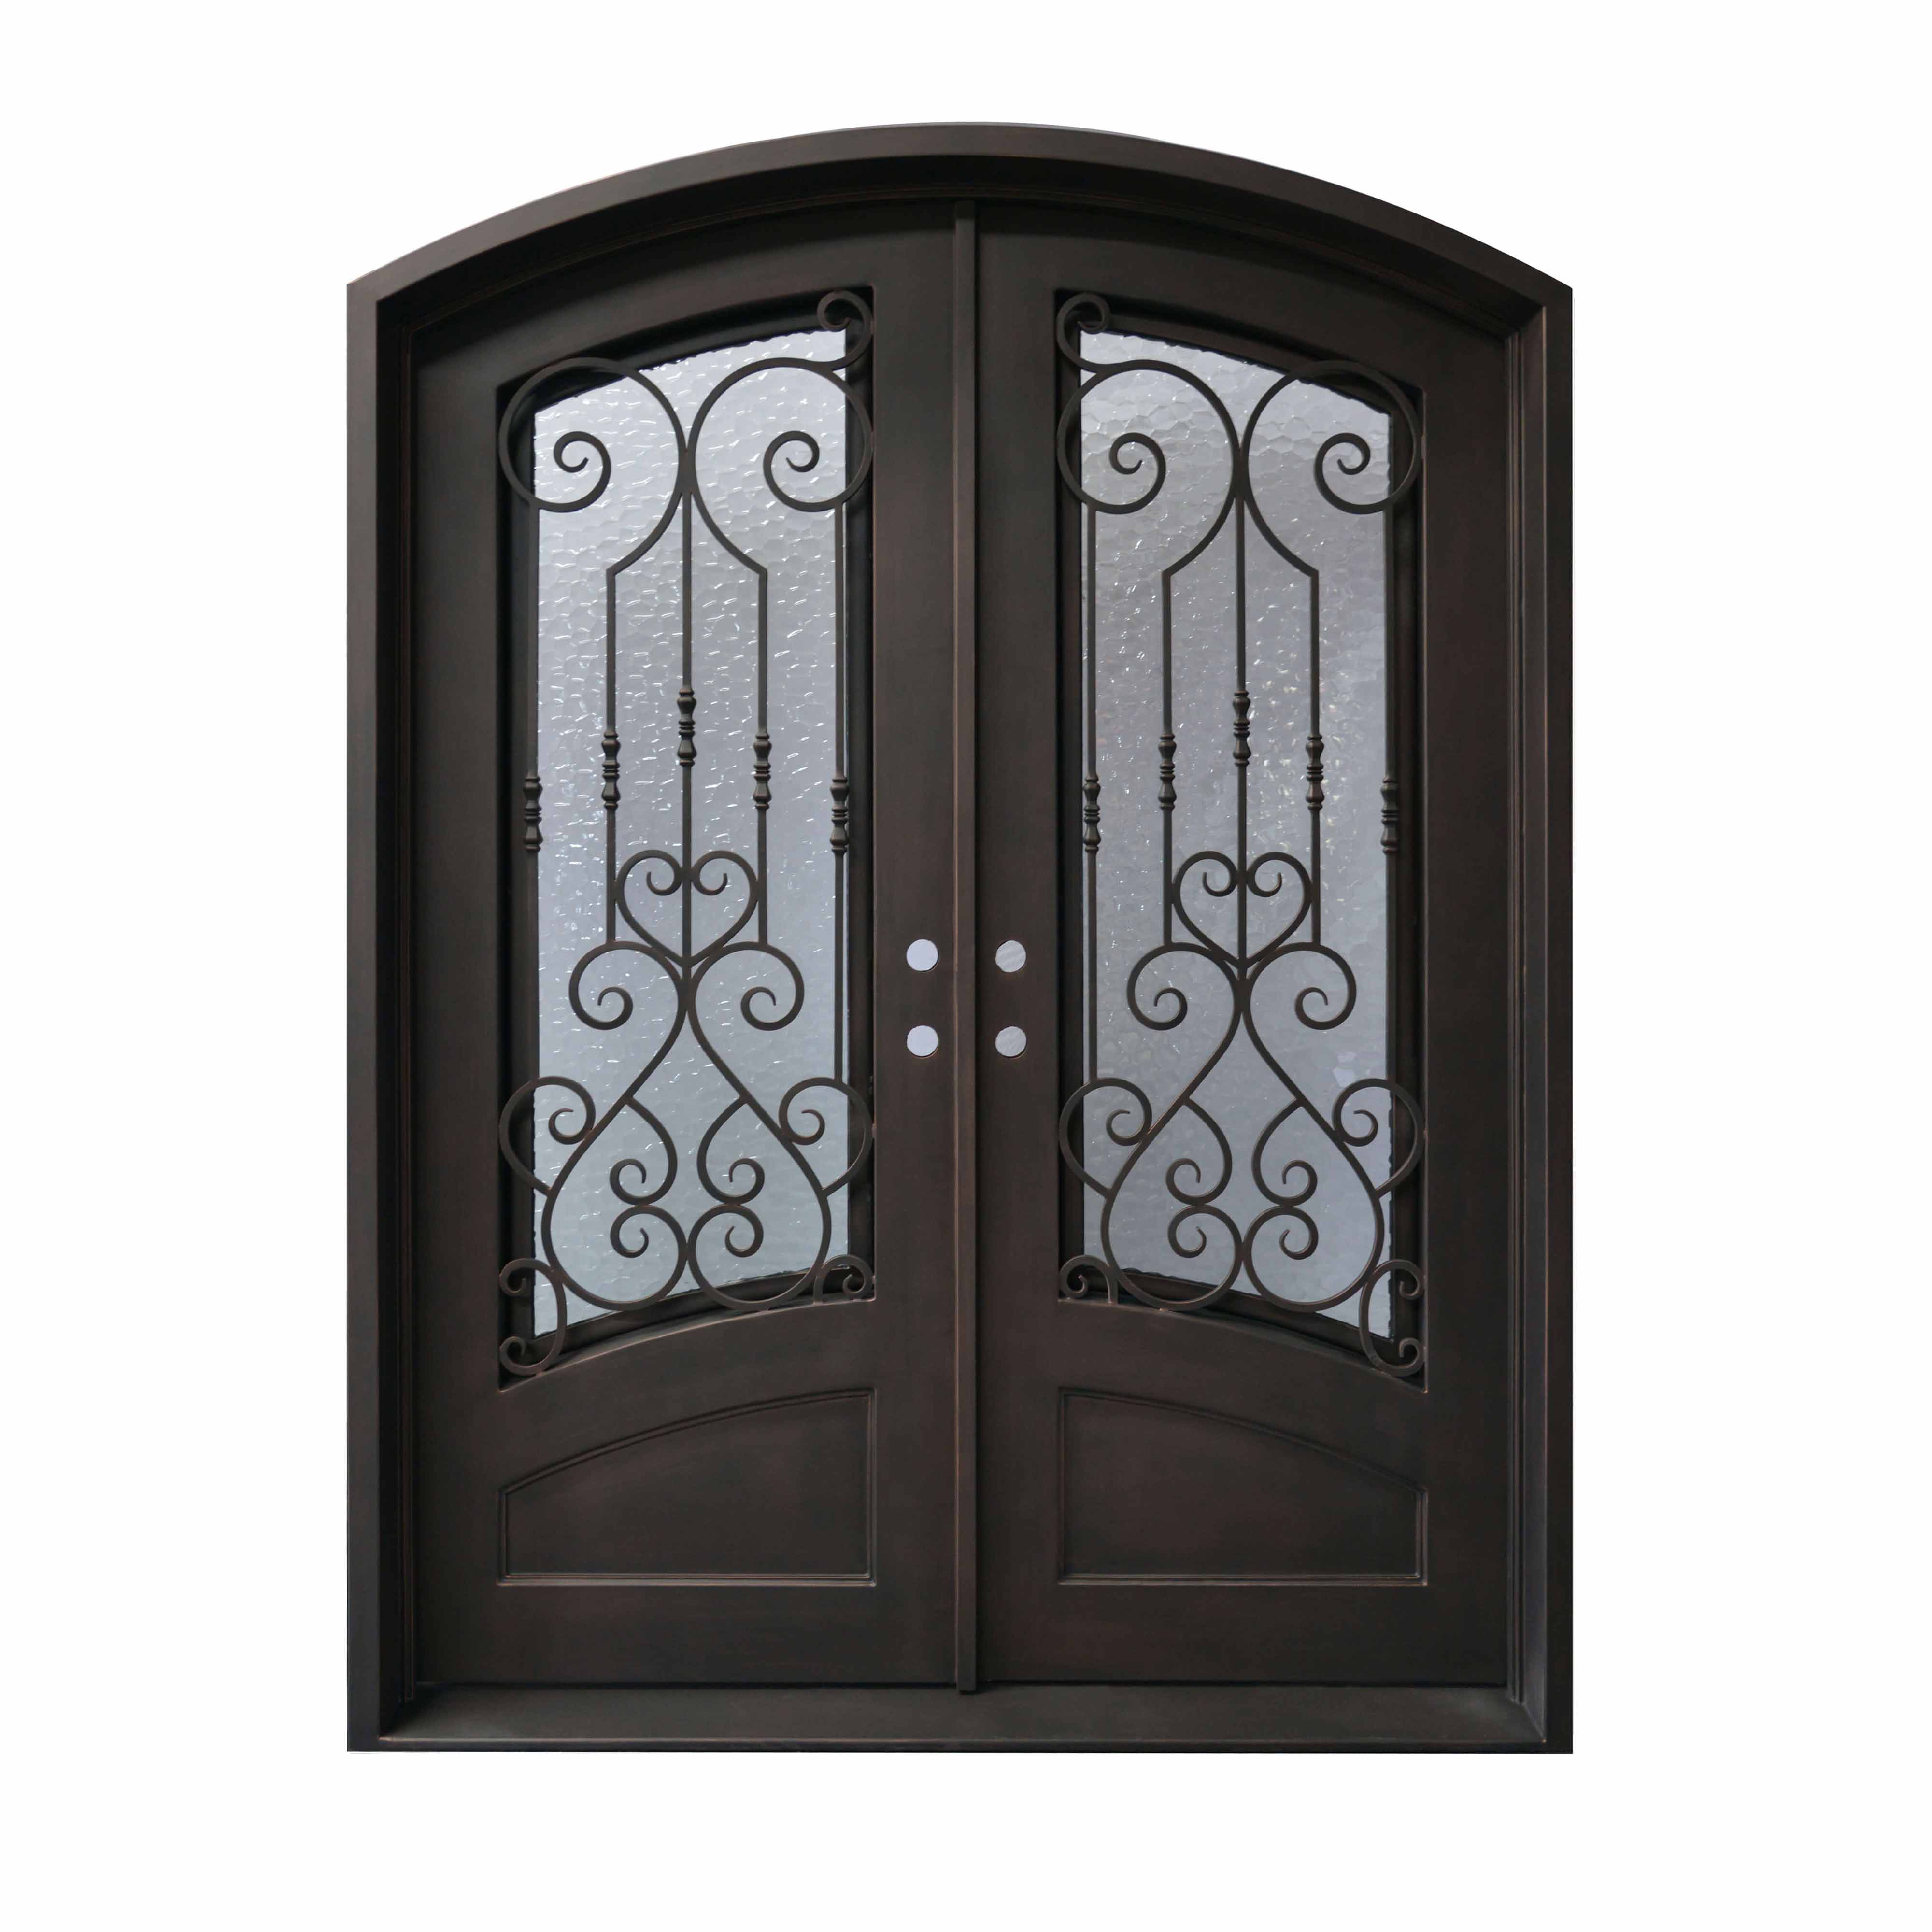 Handmade wrought iron double door with double pane frosted glass